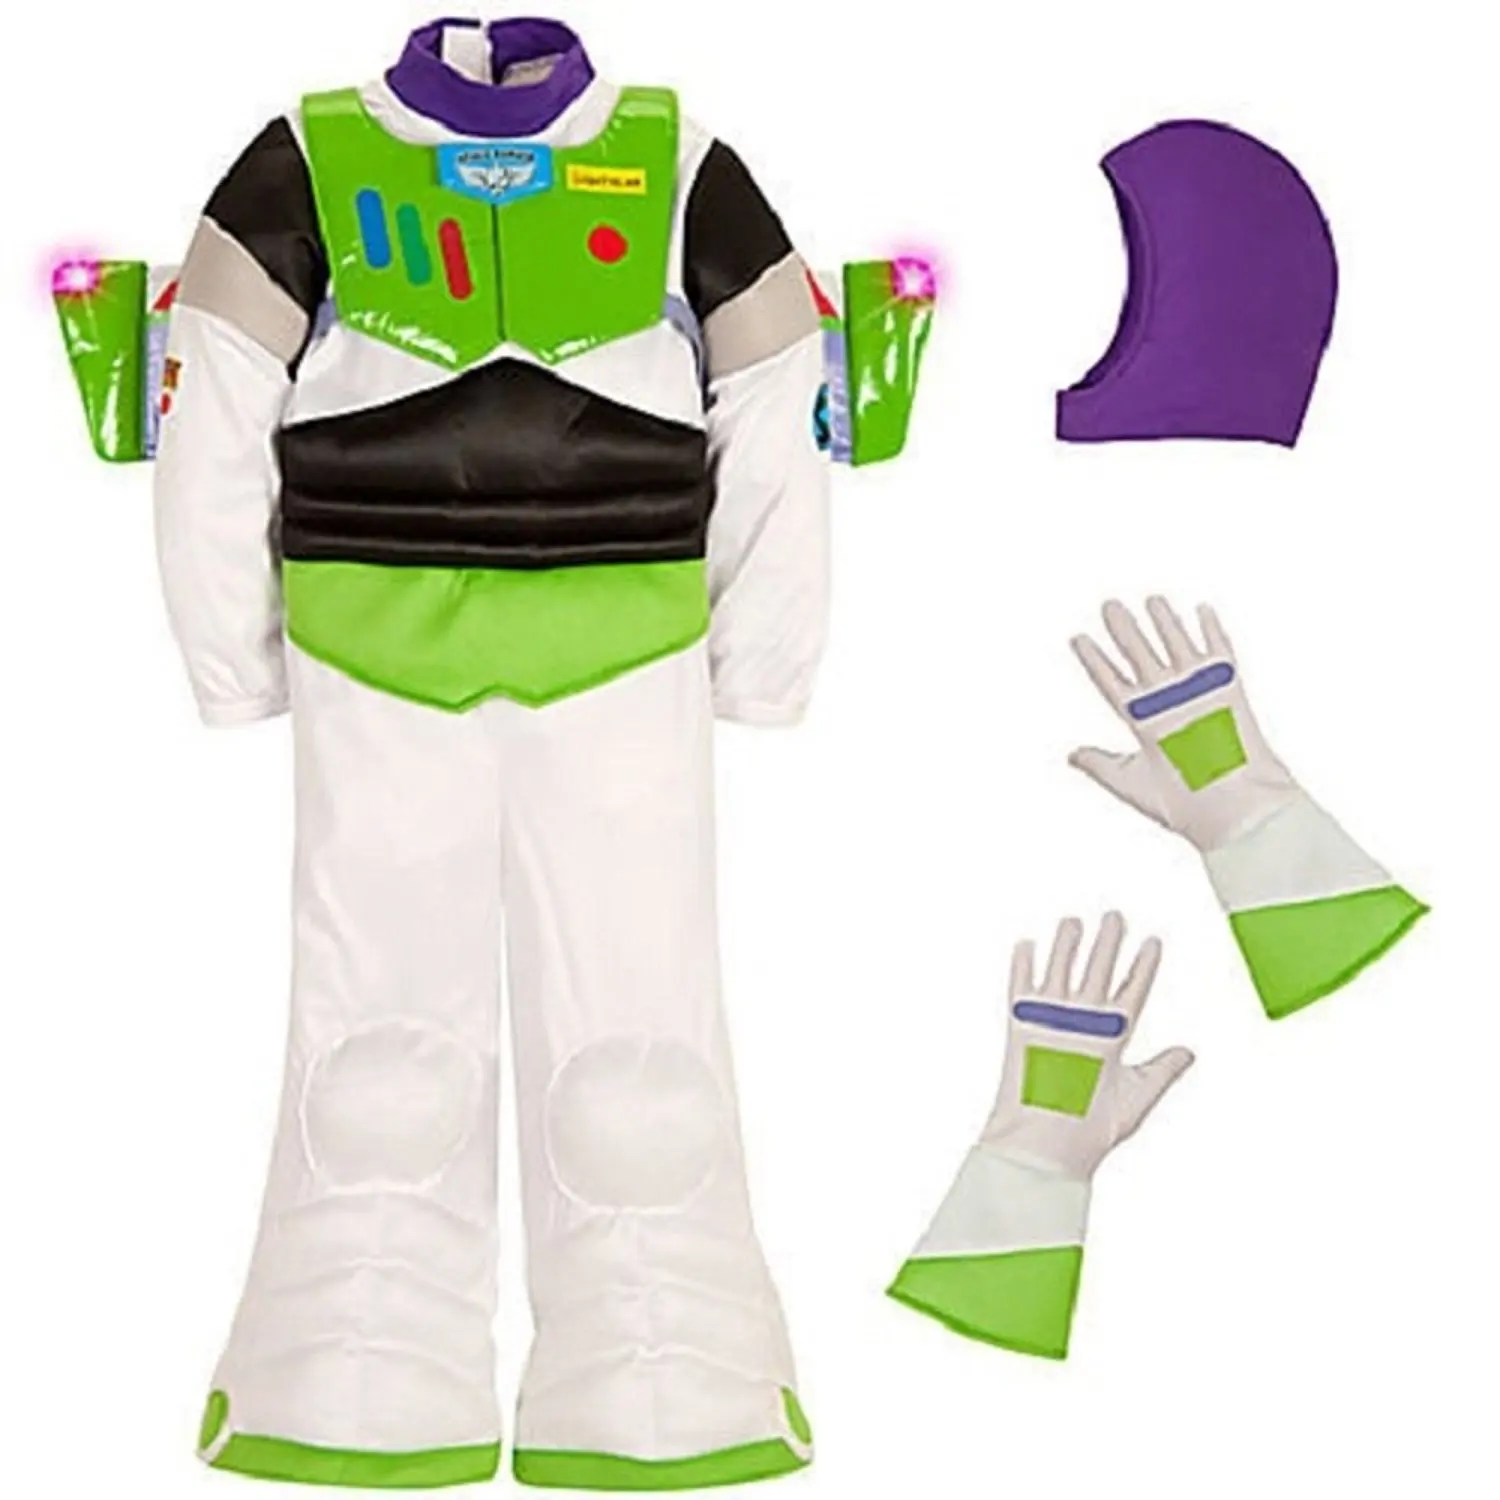 download buzz lightyear toy story 1